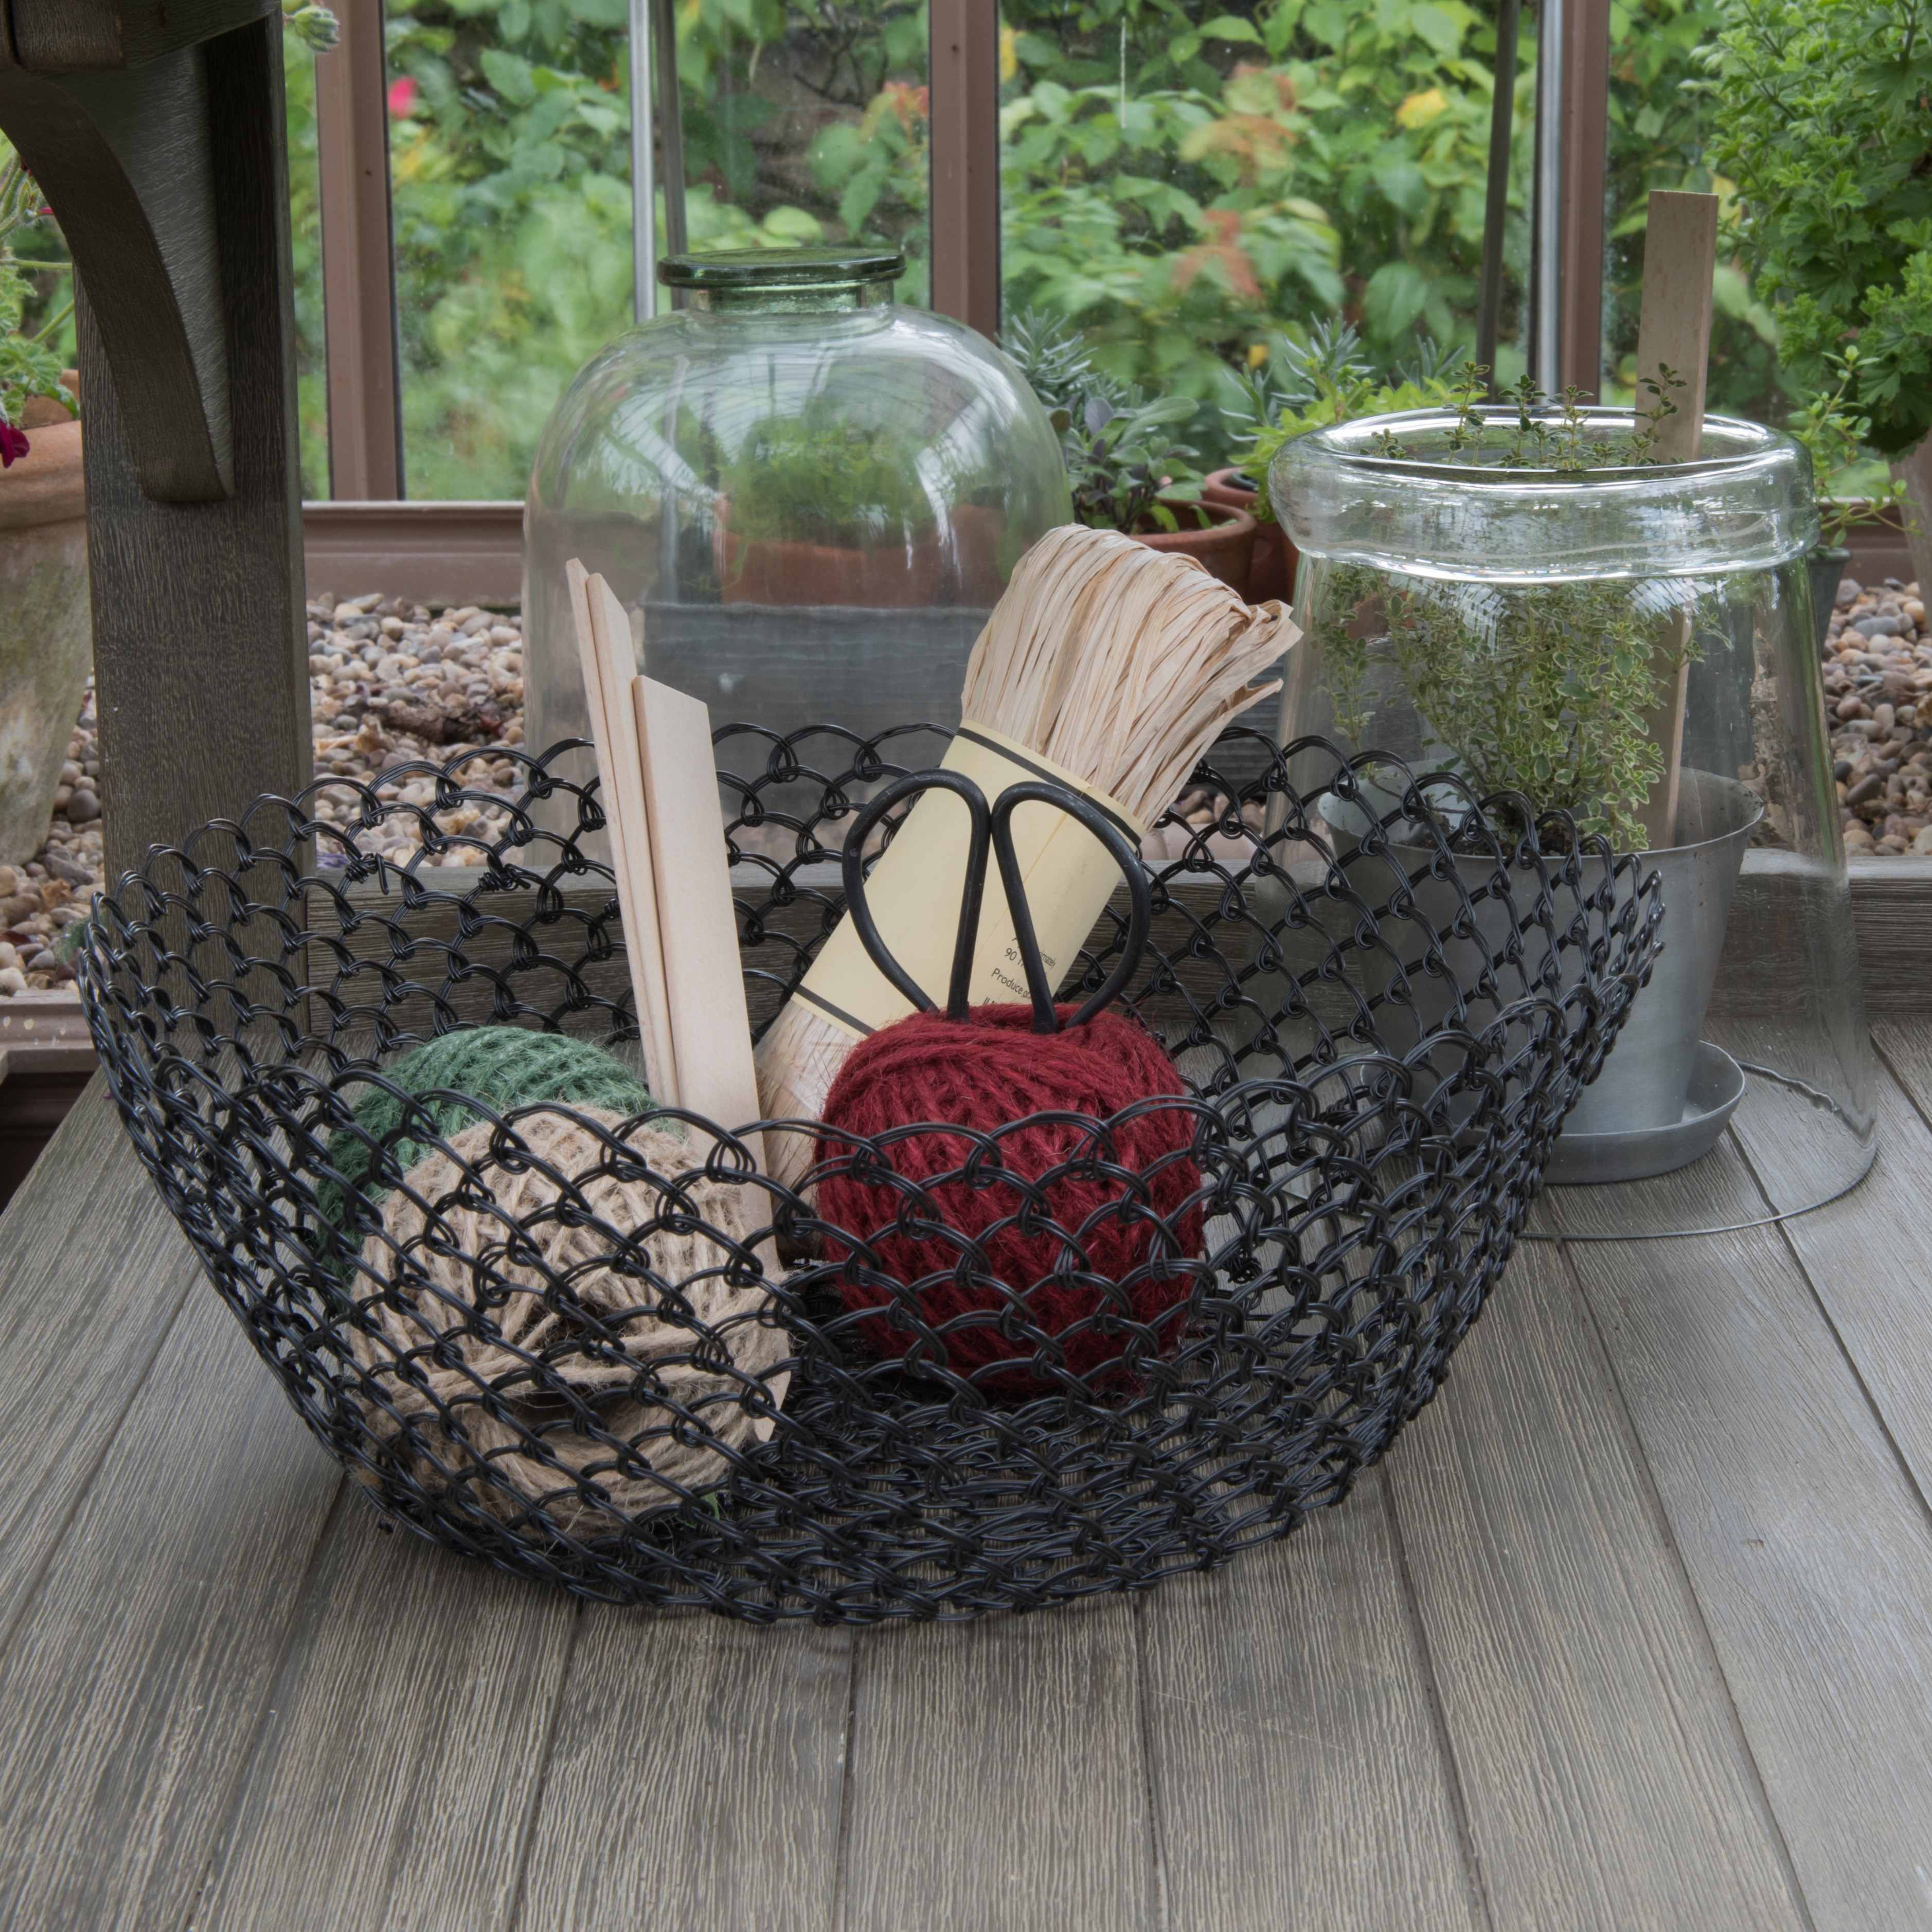 Woven wire bowl